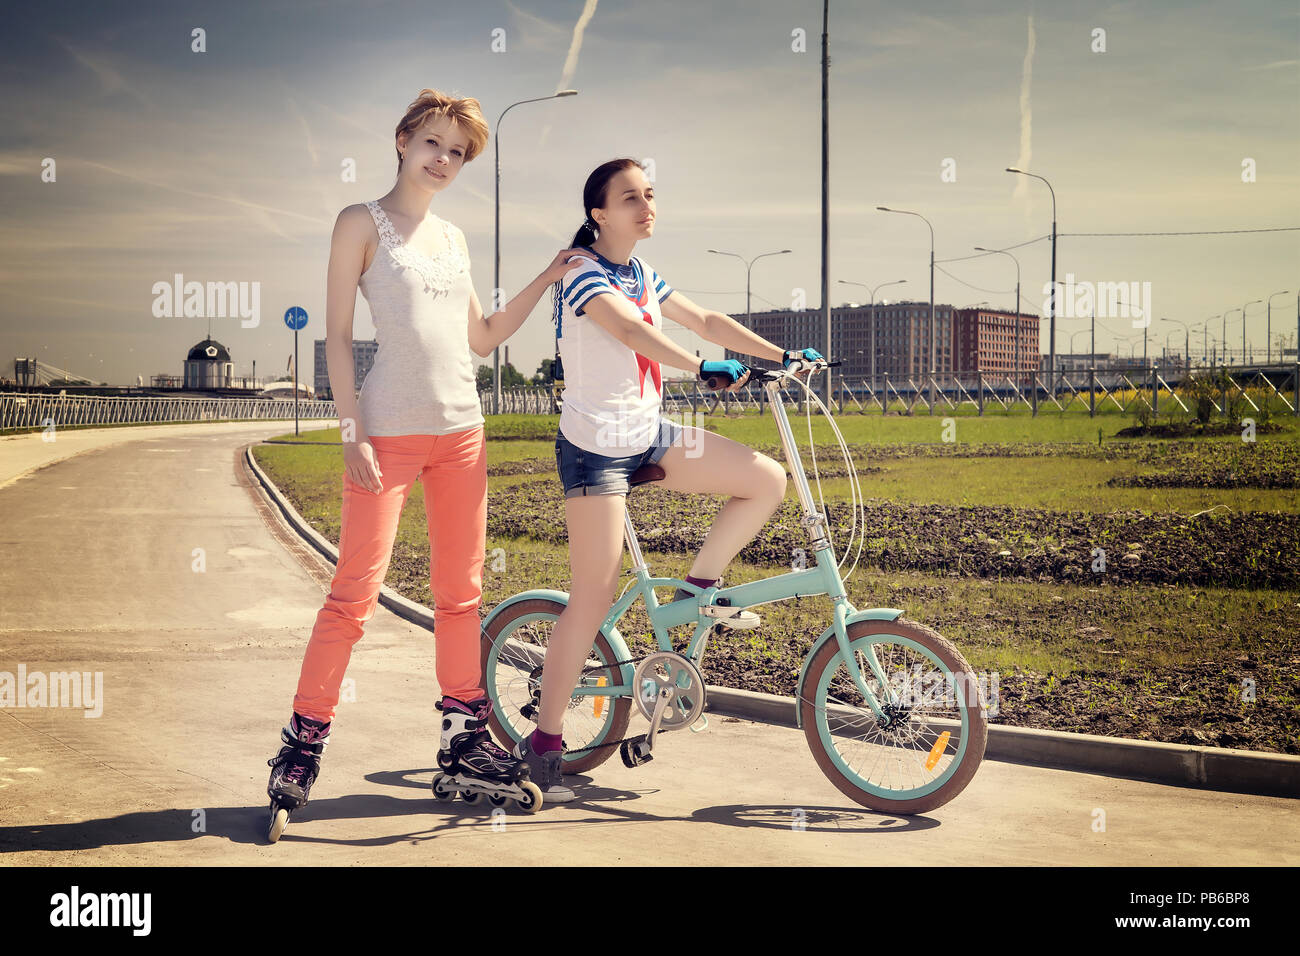 Two young female friends one on a bicycle, one on a roler scates. Summer sport and leisure theme. Warm toned image Stock Photo